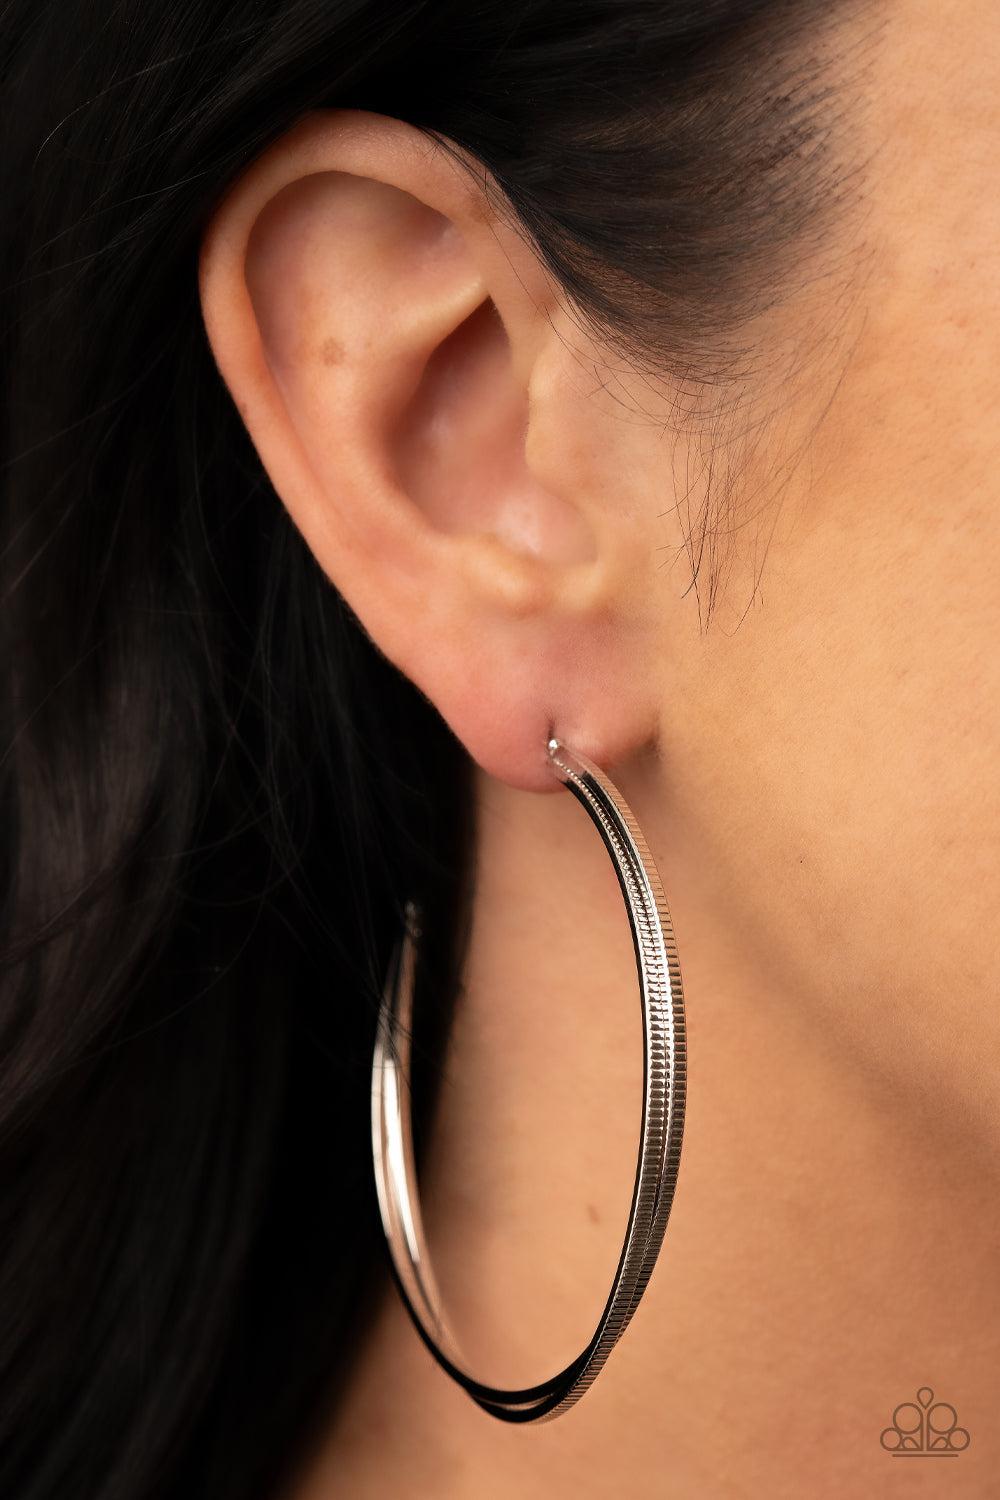 Monochromatic Curves Silver Hoop Earrings - Paparazzi Accessories-on model - CarasShop.com - $5 Jewelry by Cara Jewels